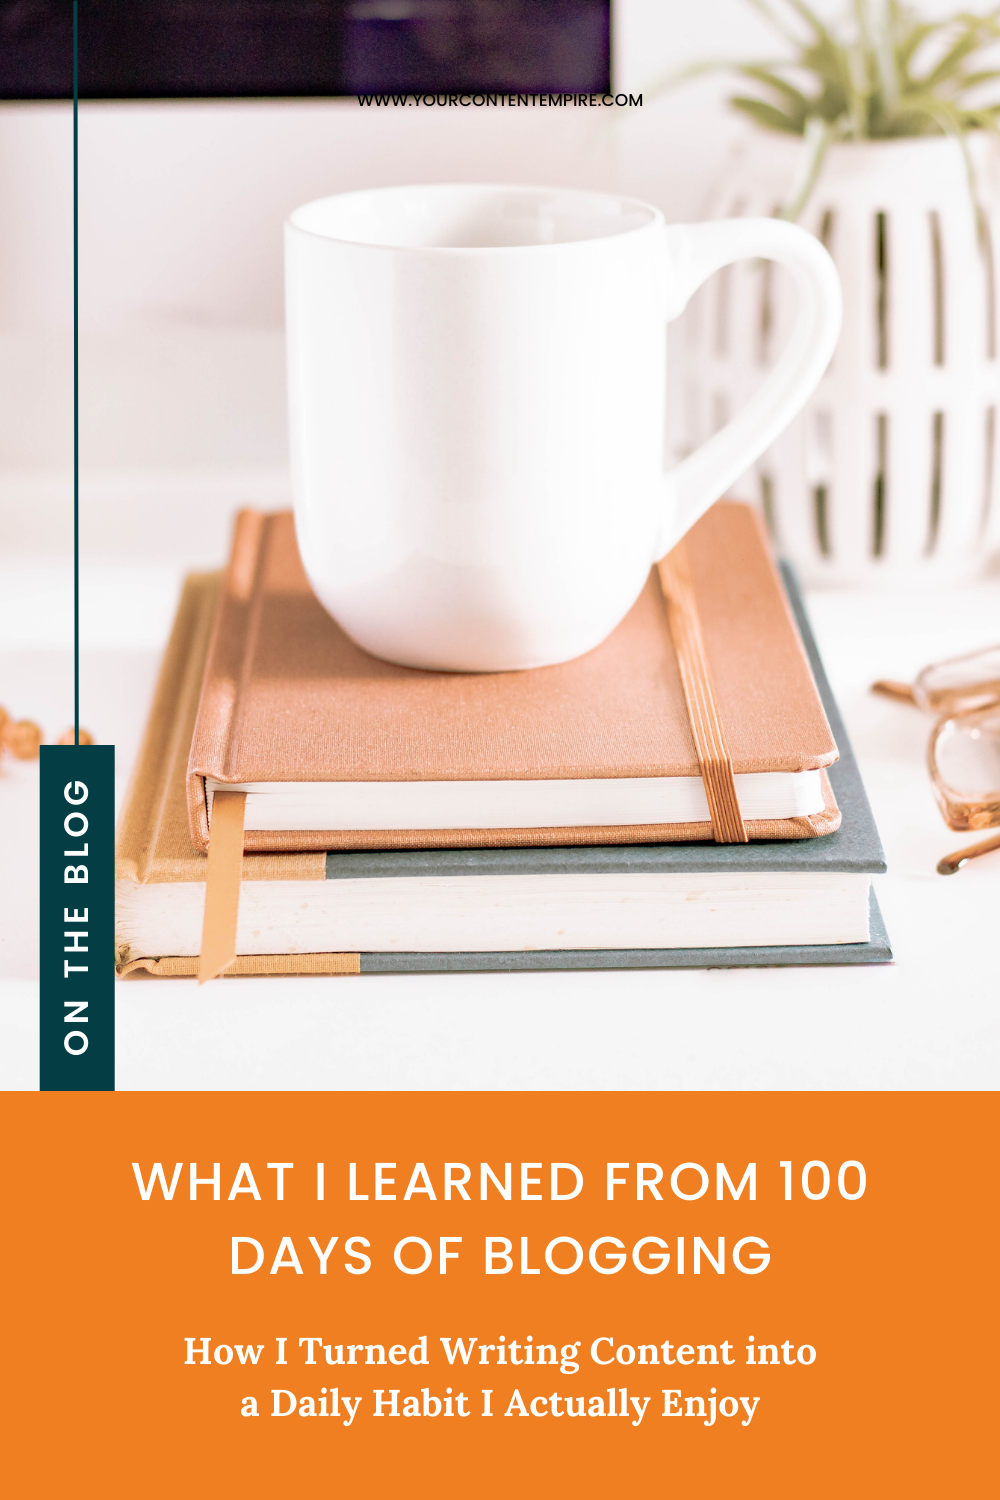 What I Learned from 100 Days of Blogging